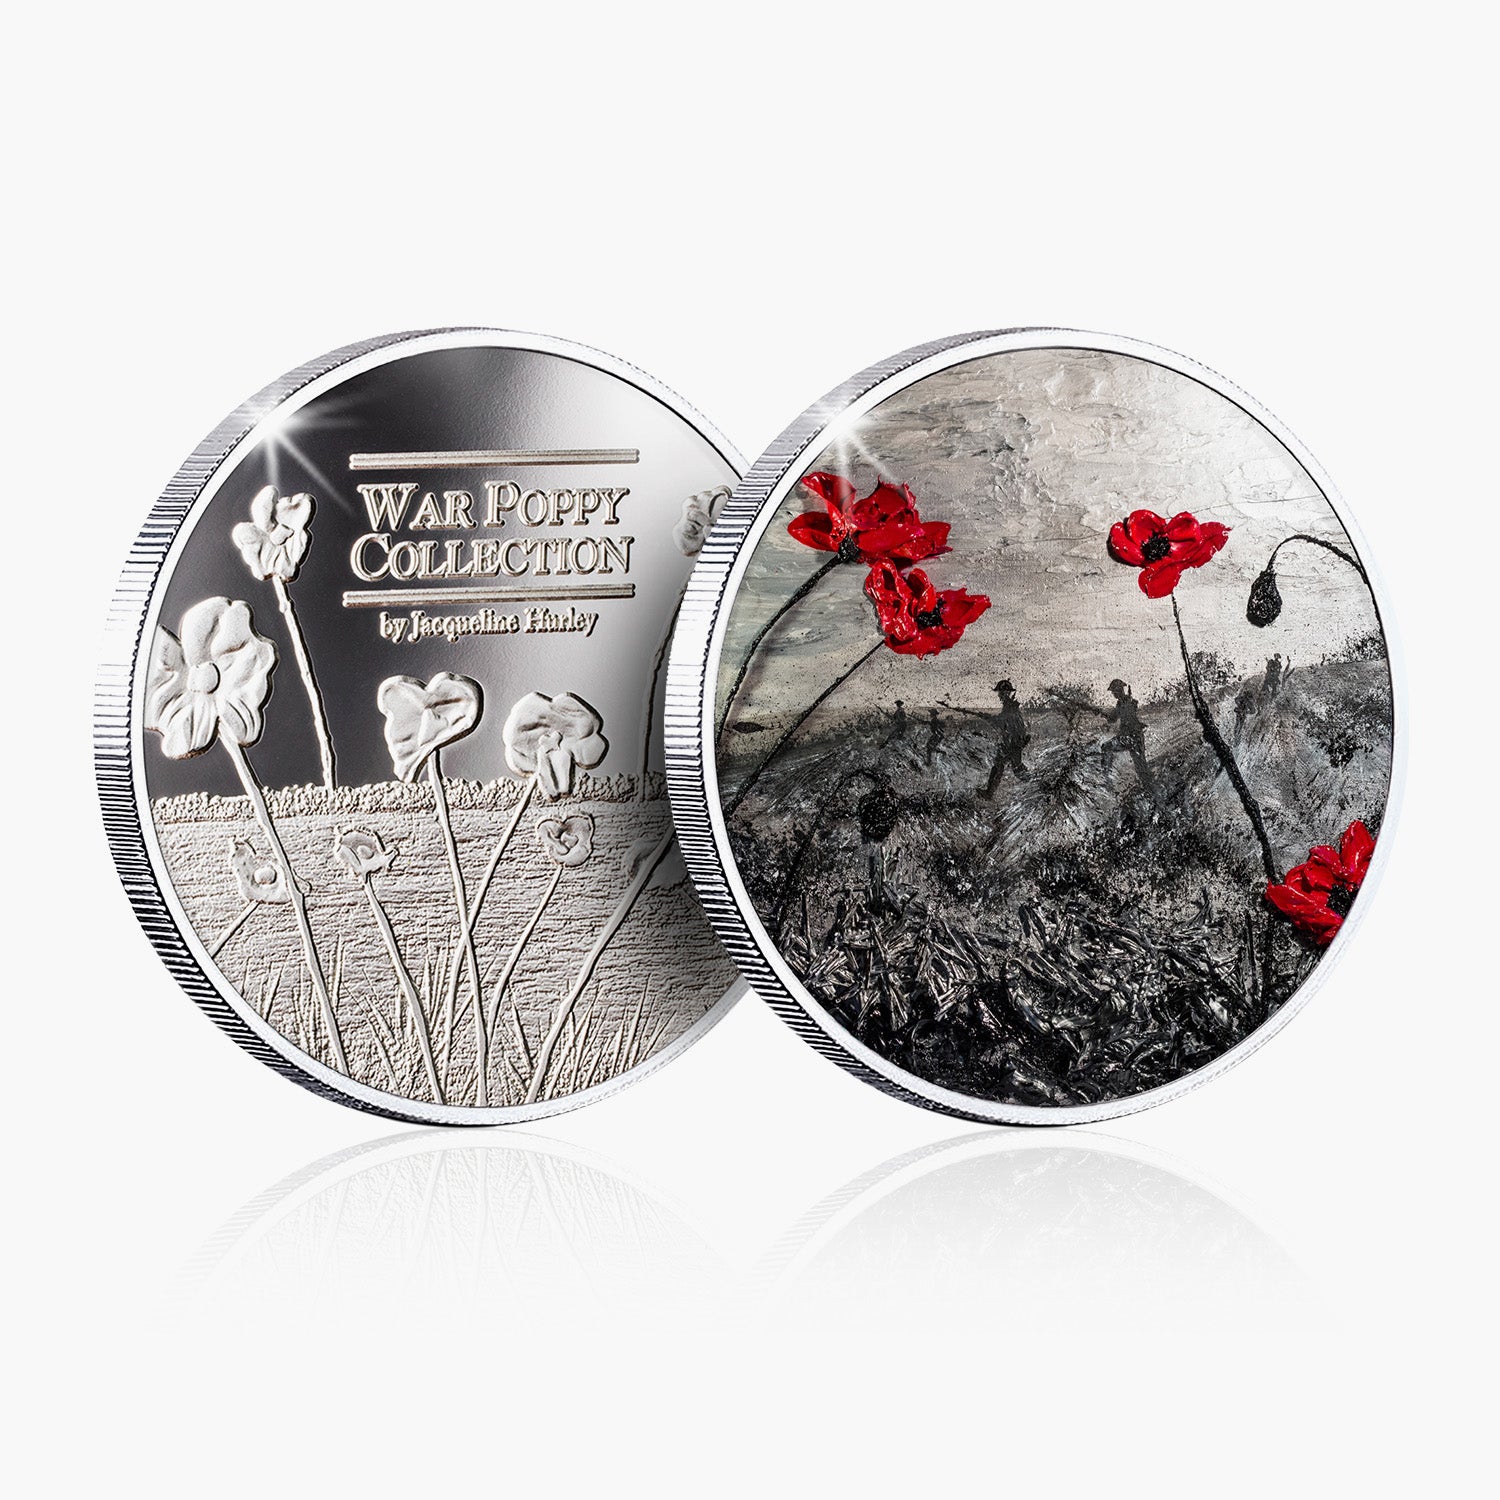 From Freedom's Land Silver-Plated Commemorative